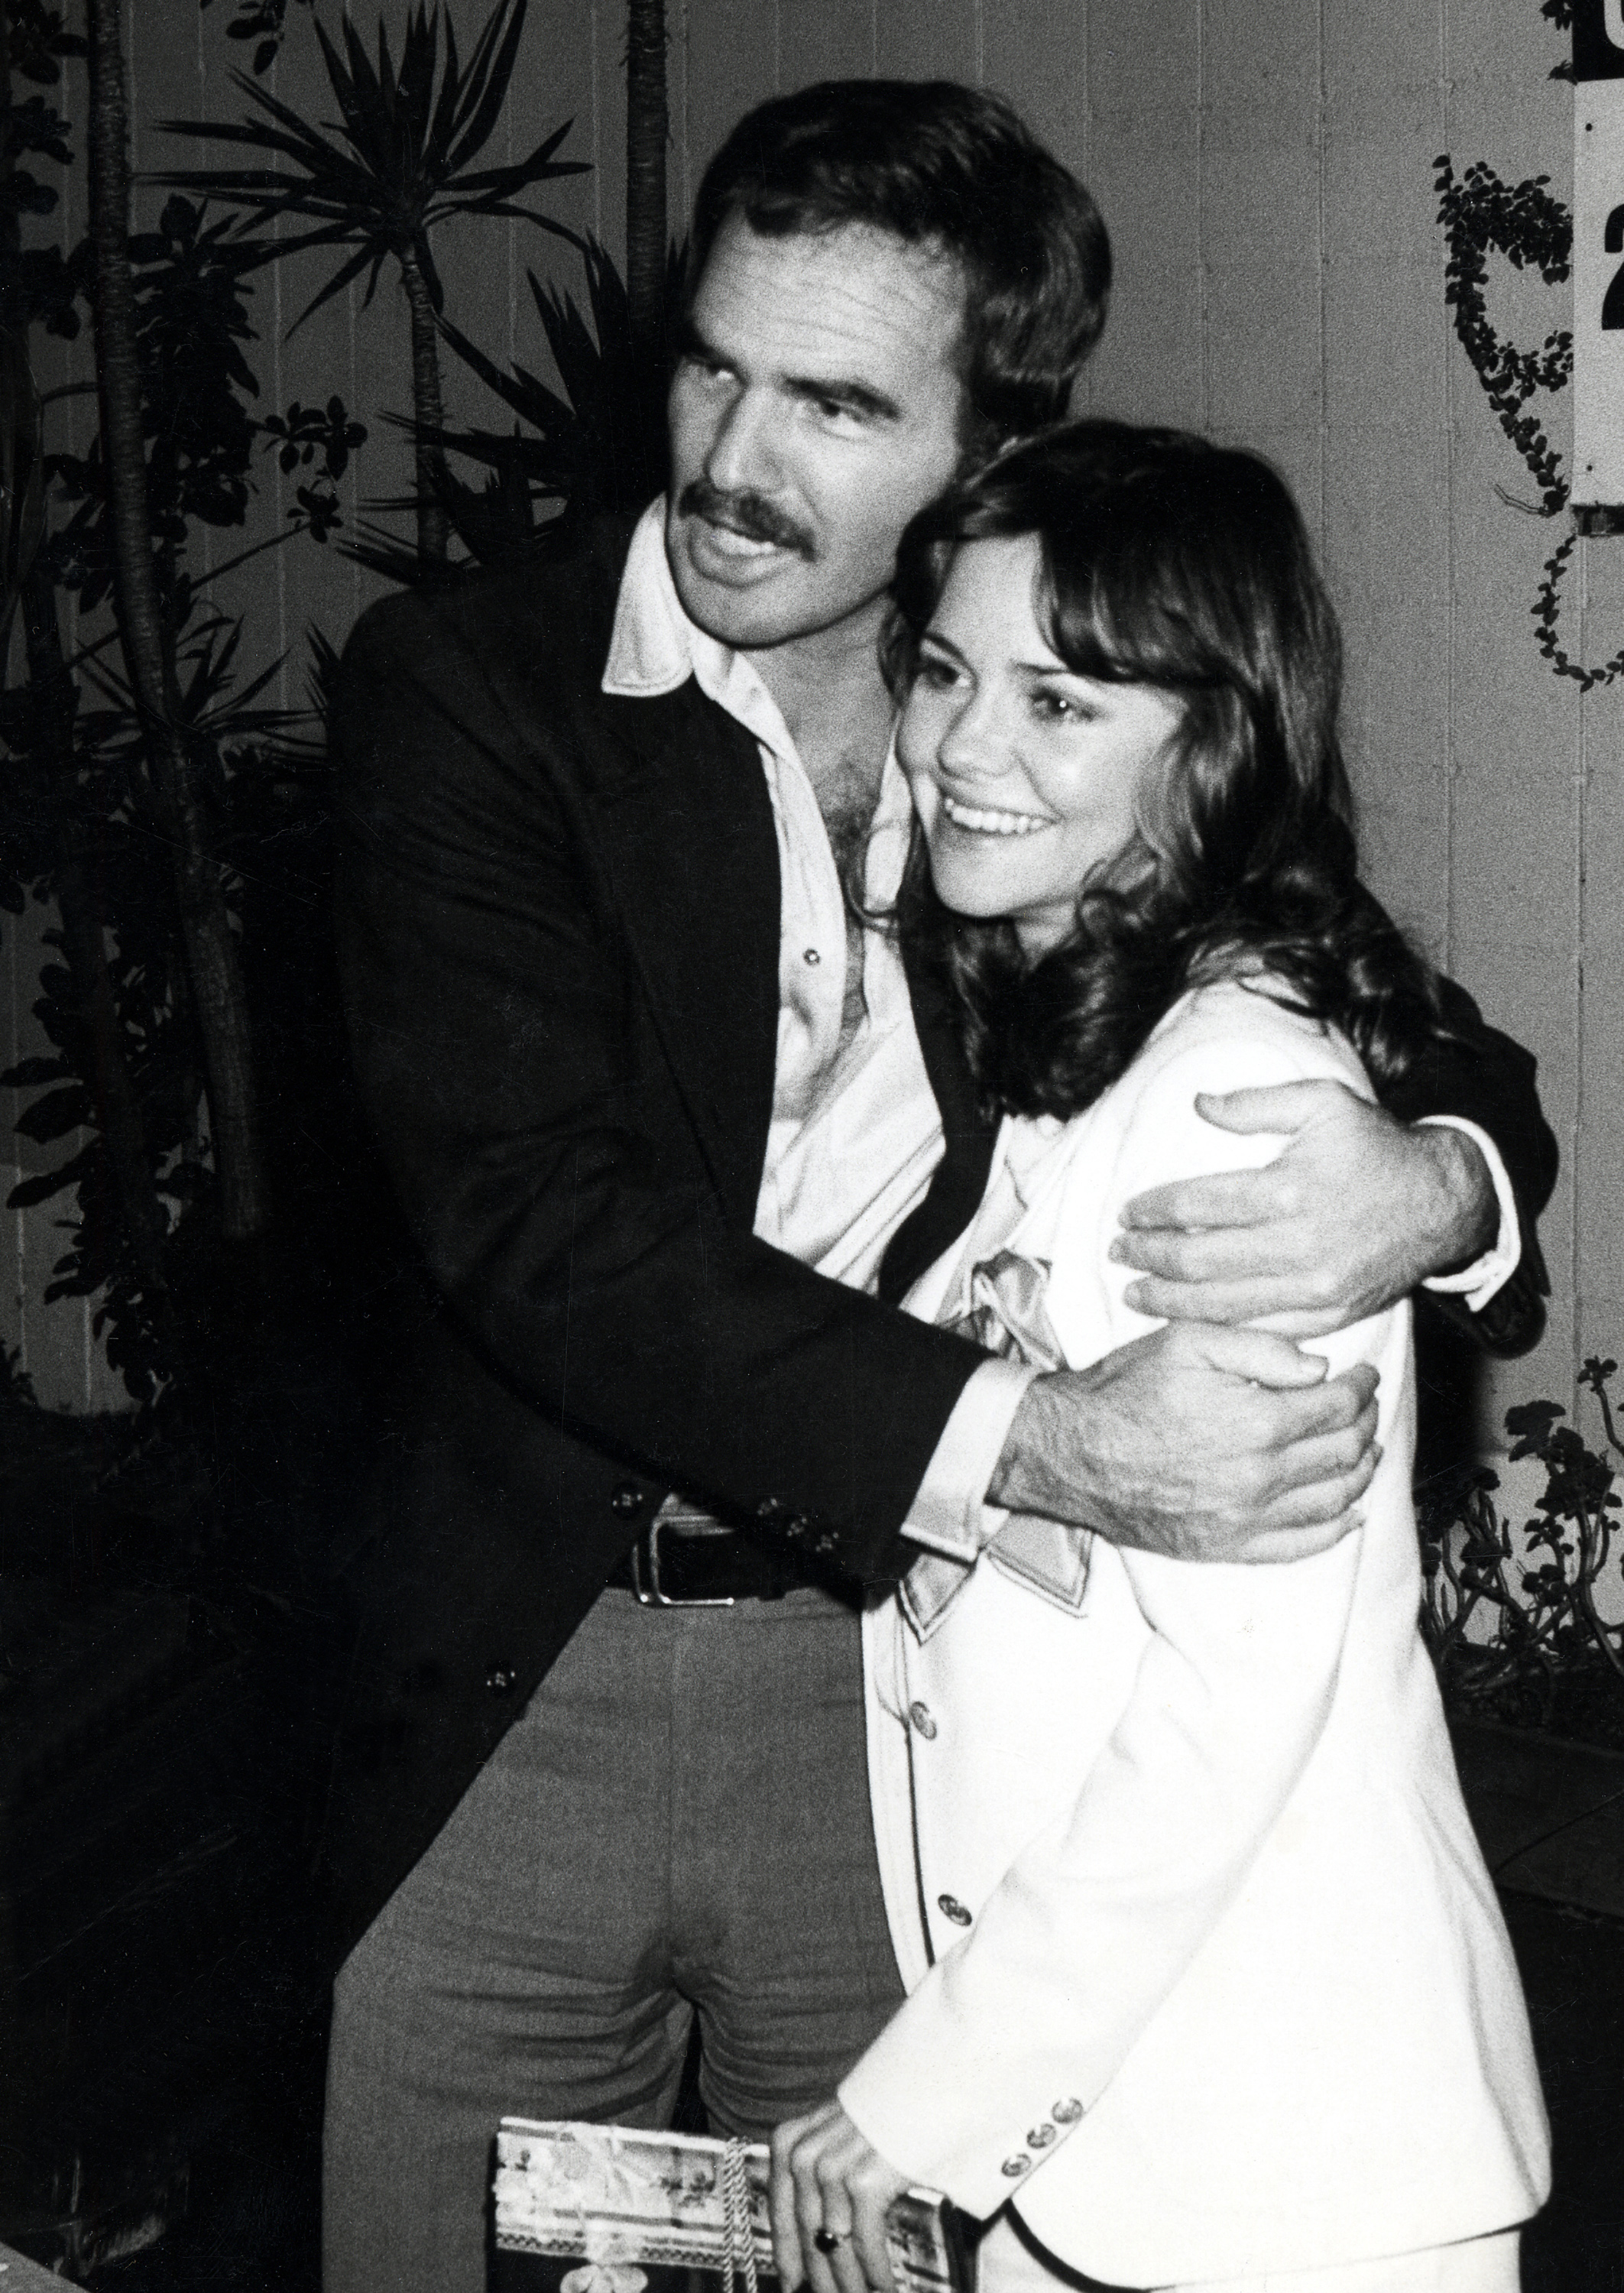 Burt Reynolds and Sally Field at Ma Maison Restaurant in Los Angeles, California on January 25, 1978 | Source: Getty Images